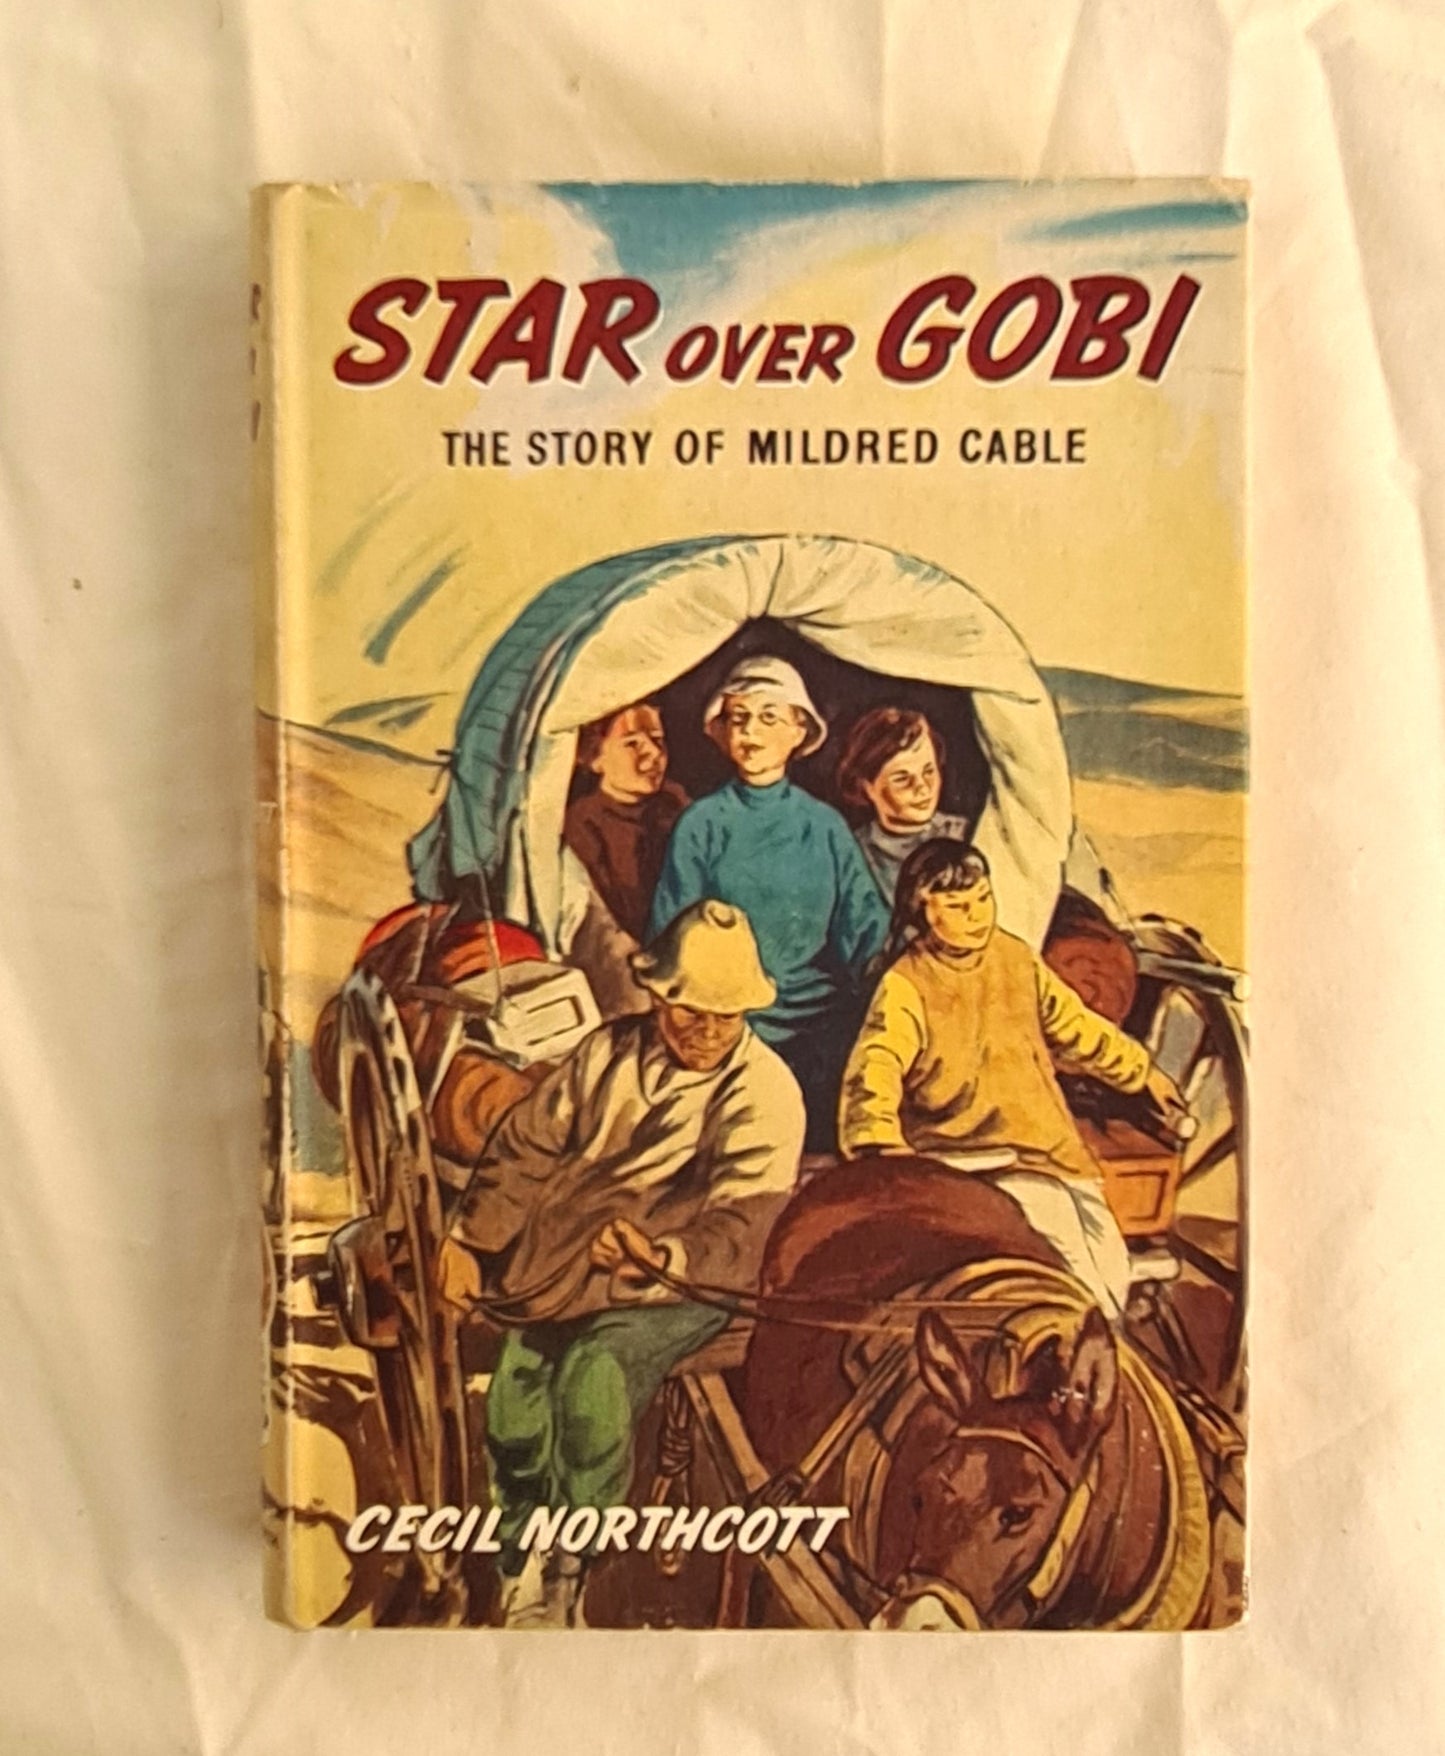 Star over Gobi  The Story of Mildred Cable  by Cecil Northcott